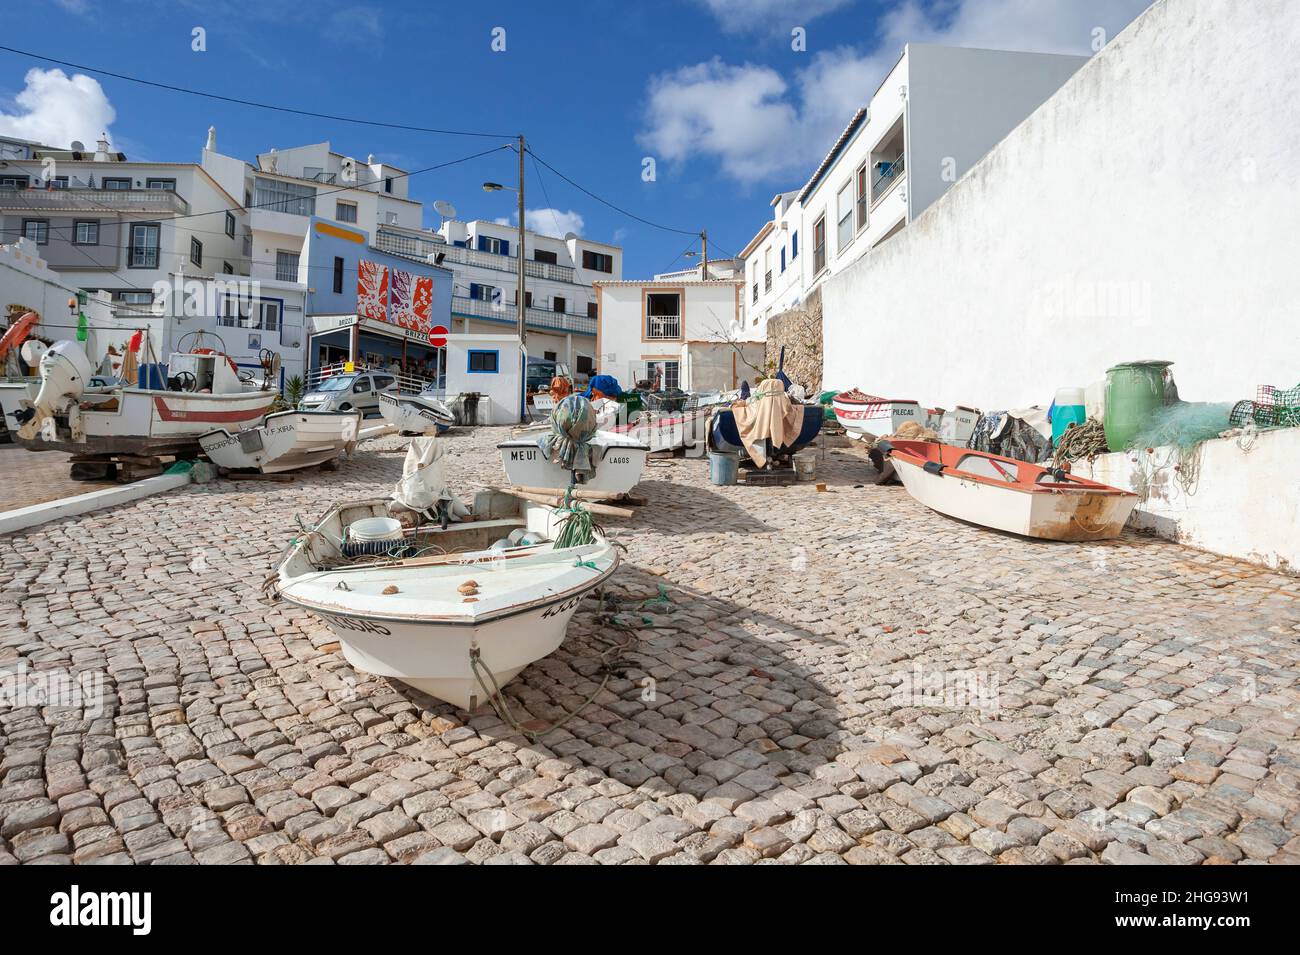 Village center with mooring for fishing boats, Burgau, Algarve, Portugal, Europe Stock Photo